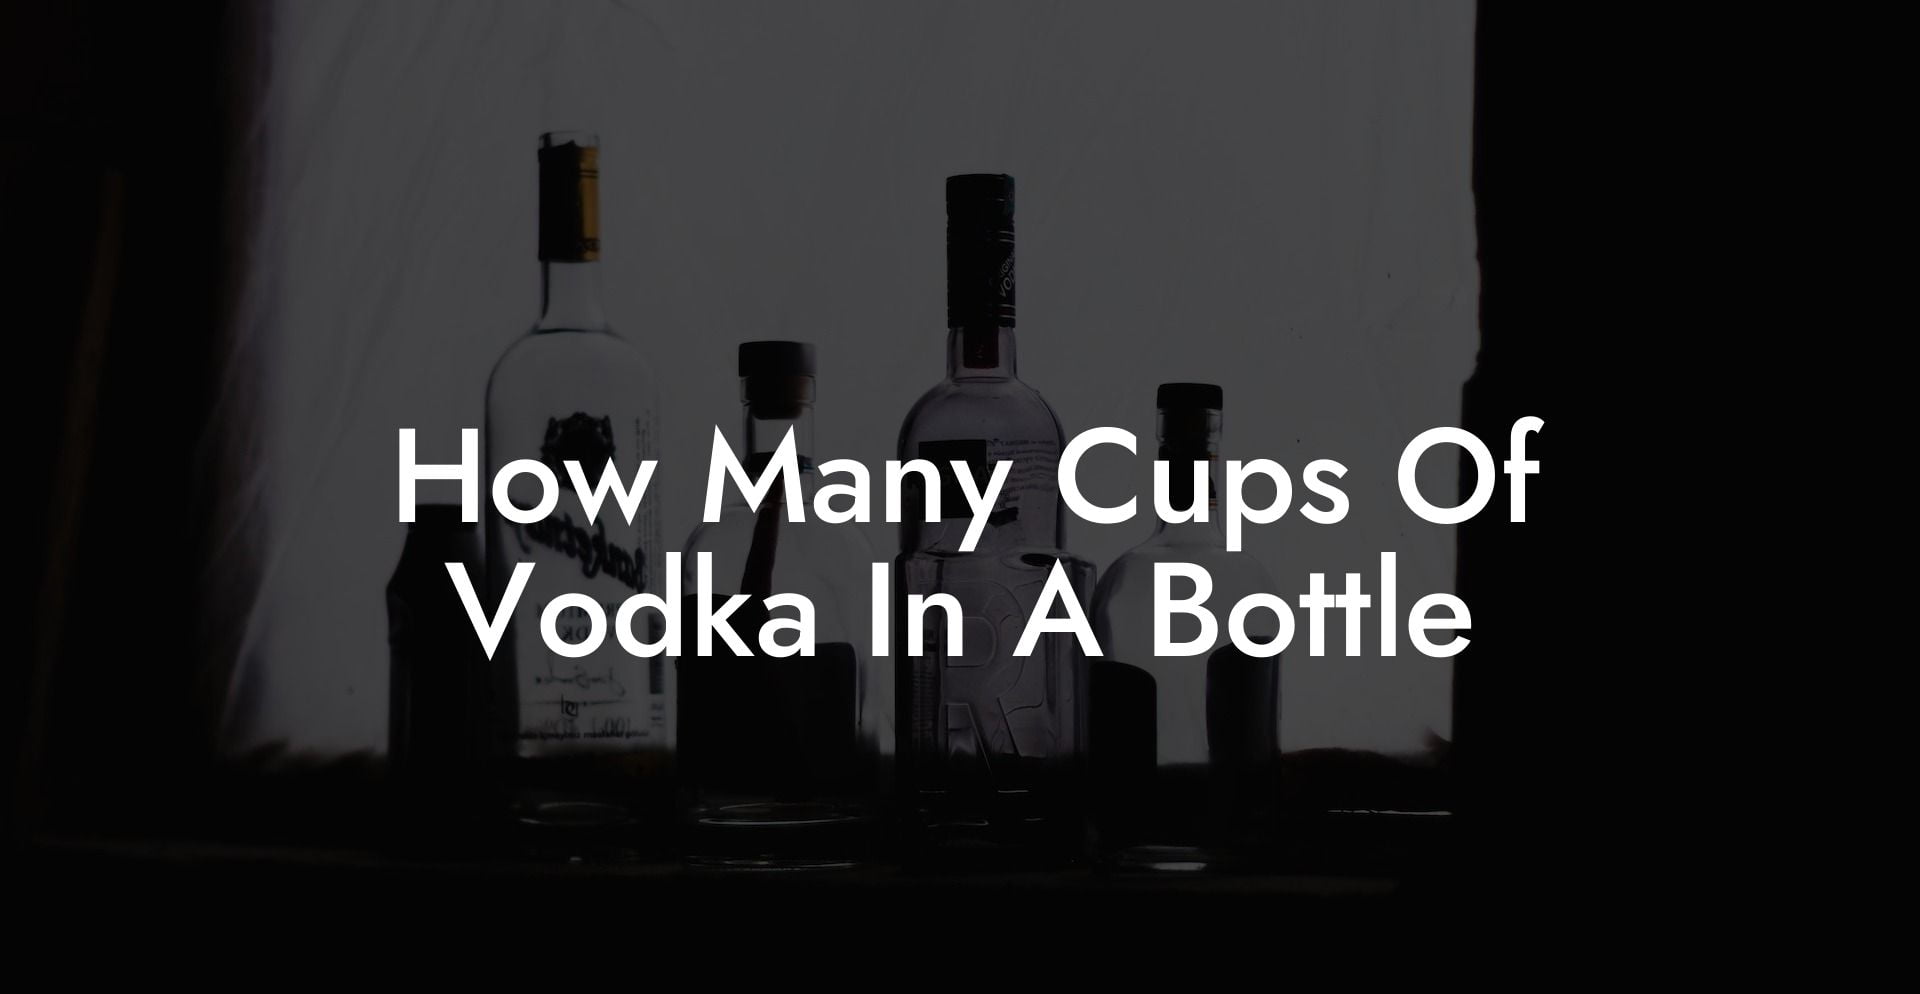 How Many Cups Of Vodka In A Bottle